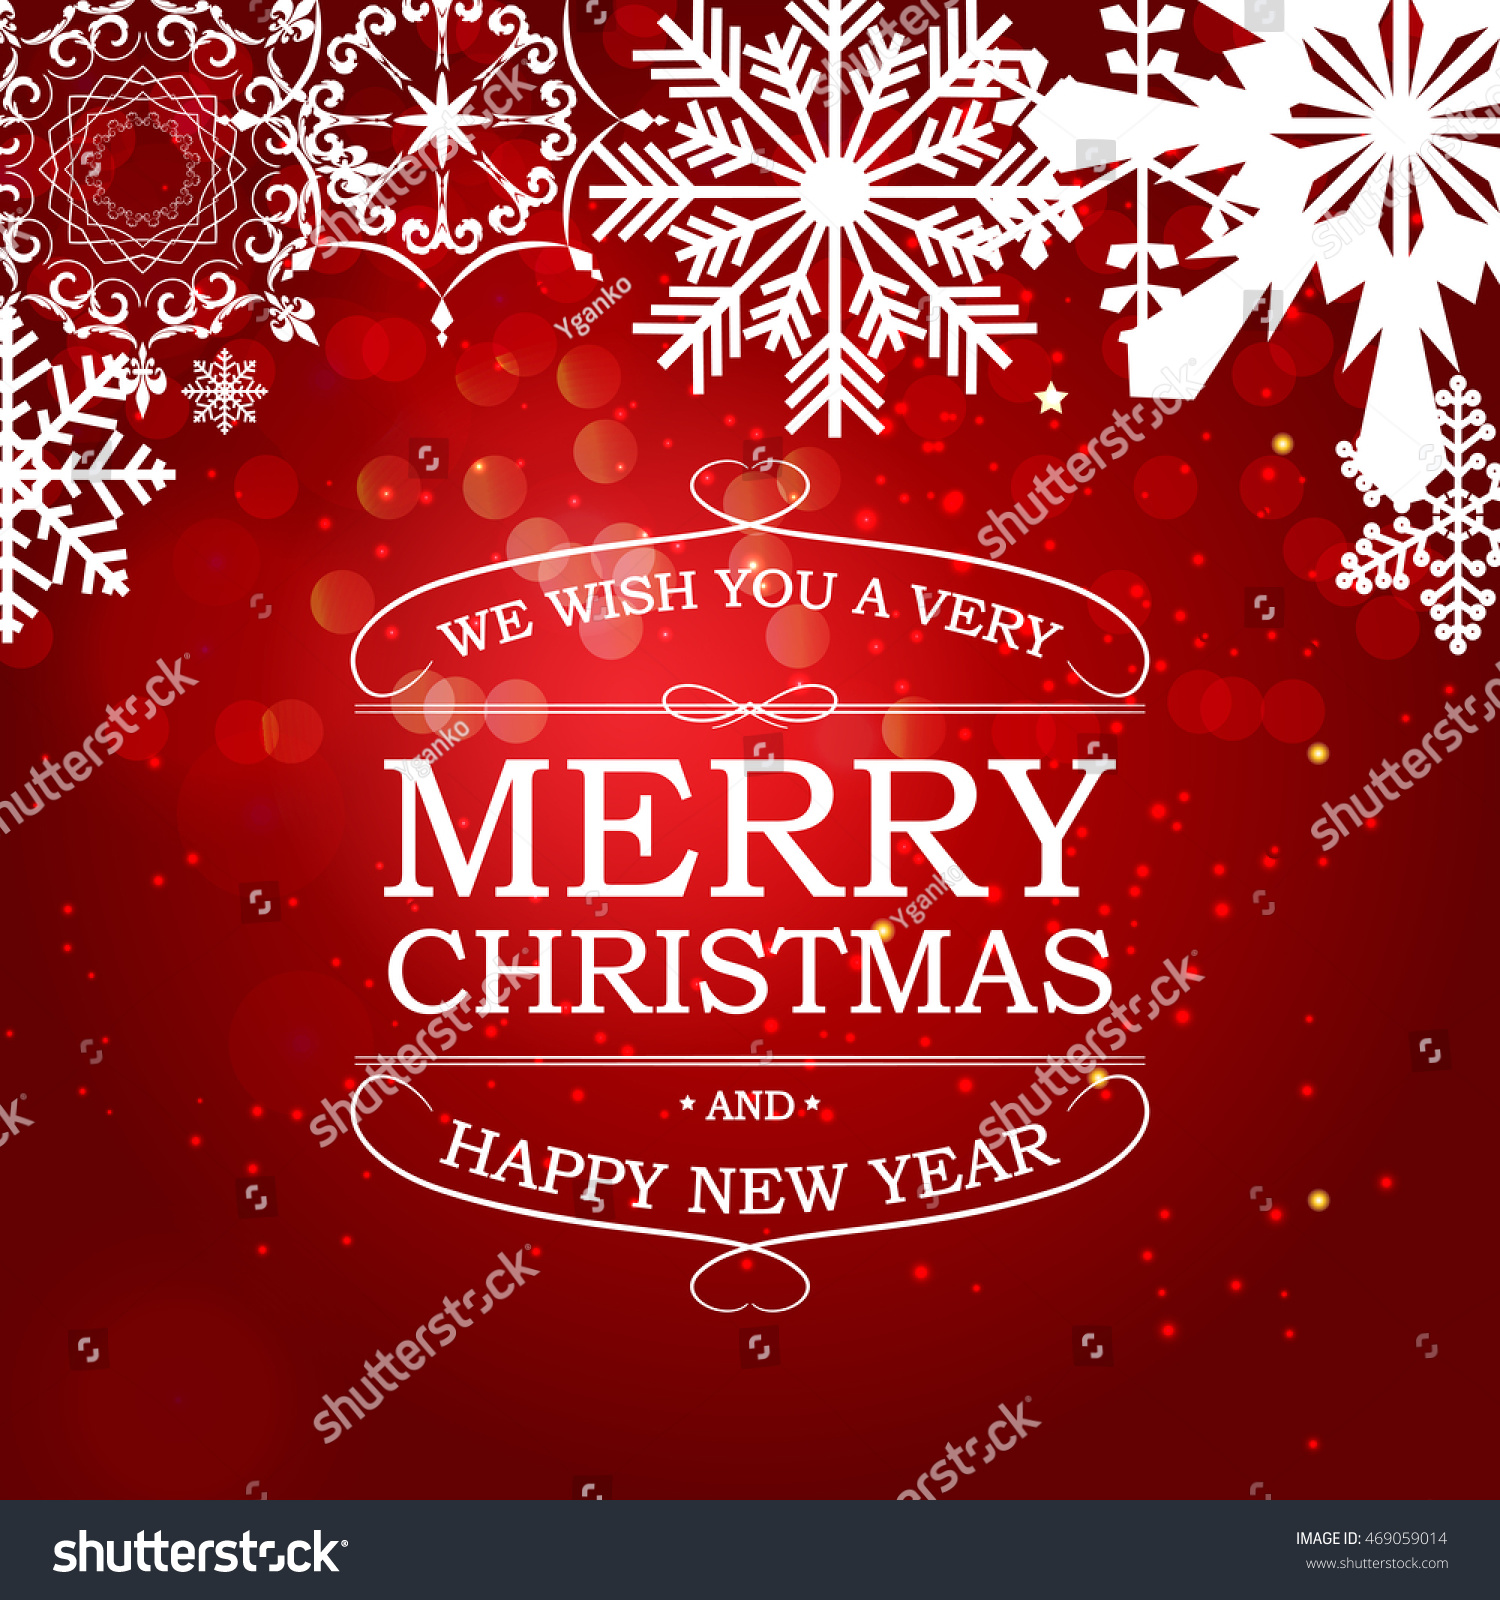 Abstract Beauty Christmas and New Year Background. Vector Illustration. EPS10
 #469059014